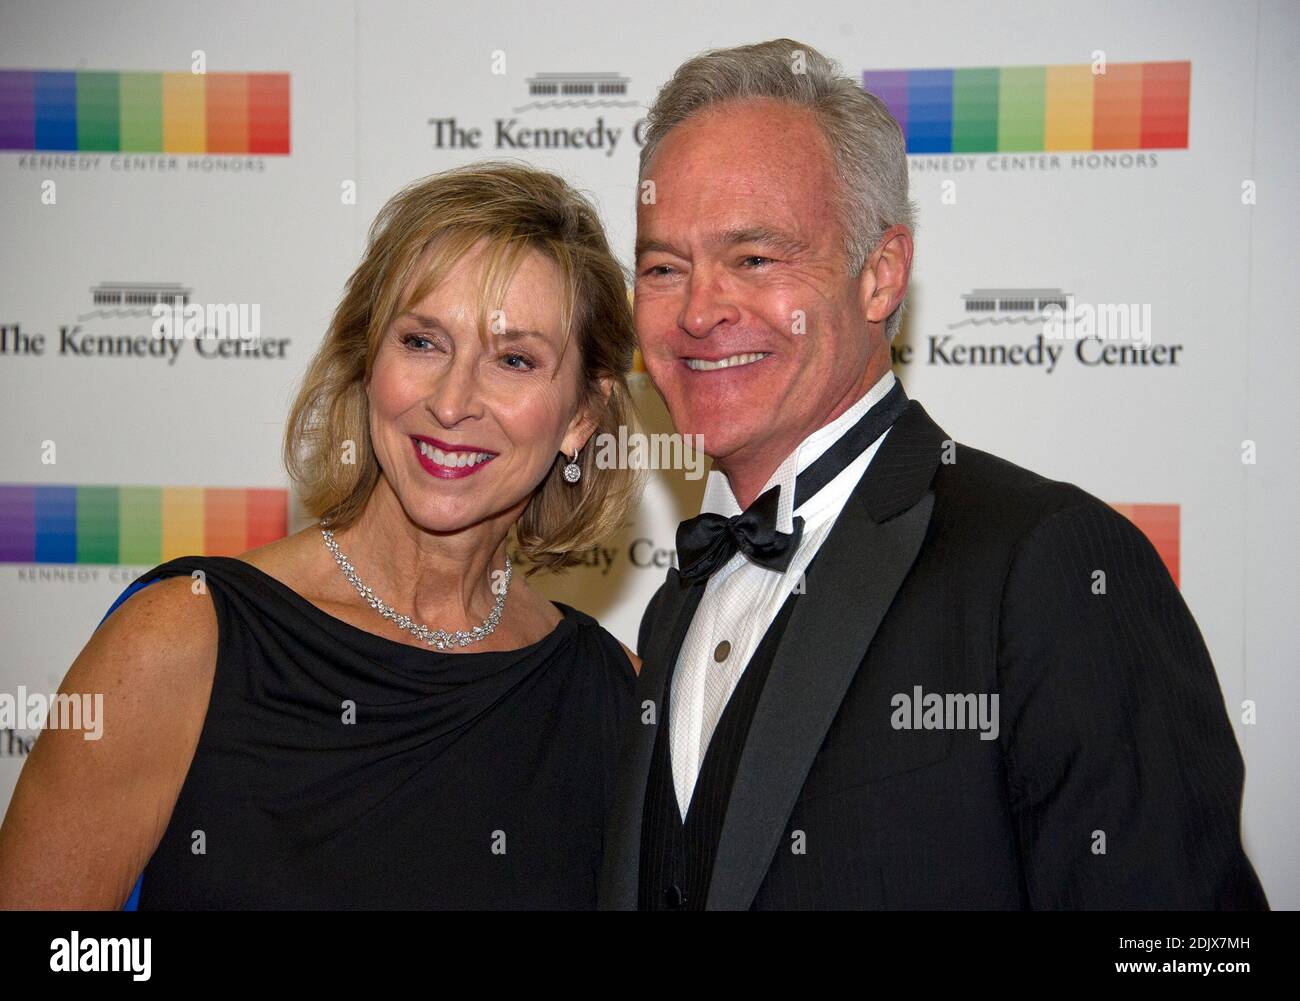 Scott Pelley and his wife, Jane Boone, arrive for the formal Artist's Dinner honoring the recipients of the 39th Annual Kennedy Center Honors hosted by United States Secretary of State John F. Kerry at the U.S. Department of State in Washington, D.C. on Saturday, December 3, 2016. The 2016 honorees are: Argentine pianist Martha Argerich; rock band the Eagles; screen and stage actor Al Pacino; gospel and blues singer Mavis Staples; and musician James Taylor. Photo by Ron Sachs /Pool via CNP/ABACAPRESS.COM Stock Photo